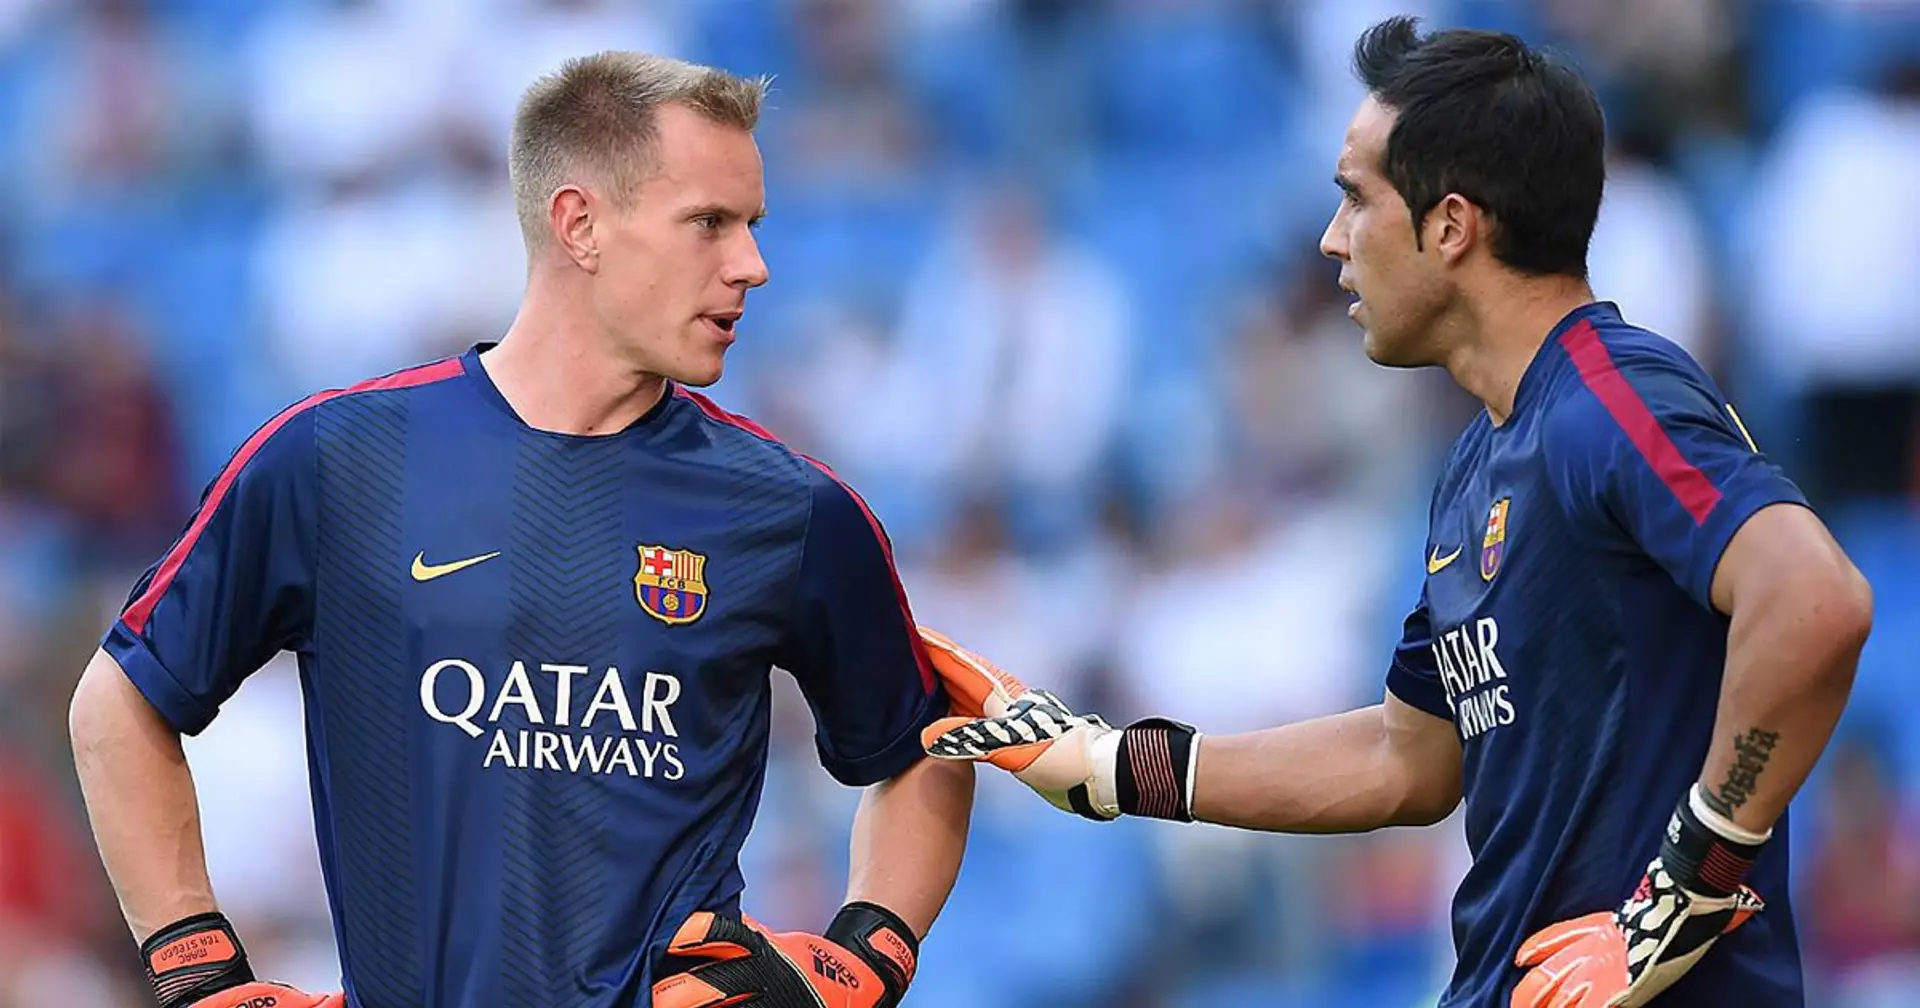 Claudio Bravo sheds light on relationship with Ter Stegen during Barca times